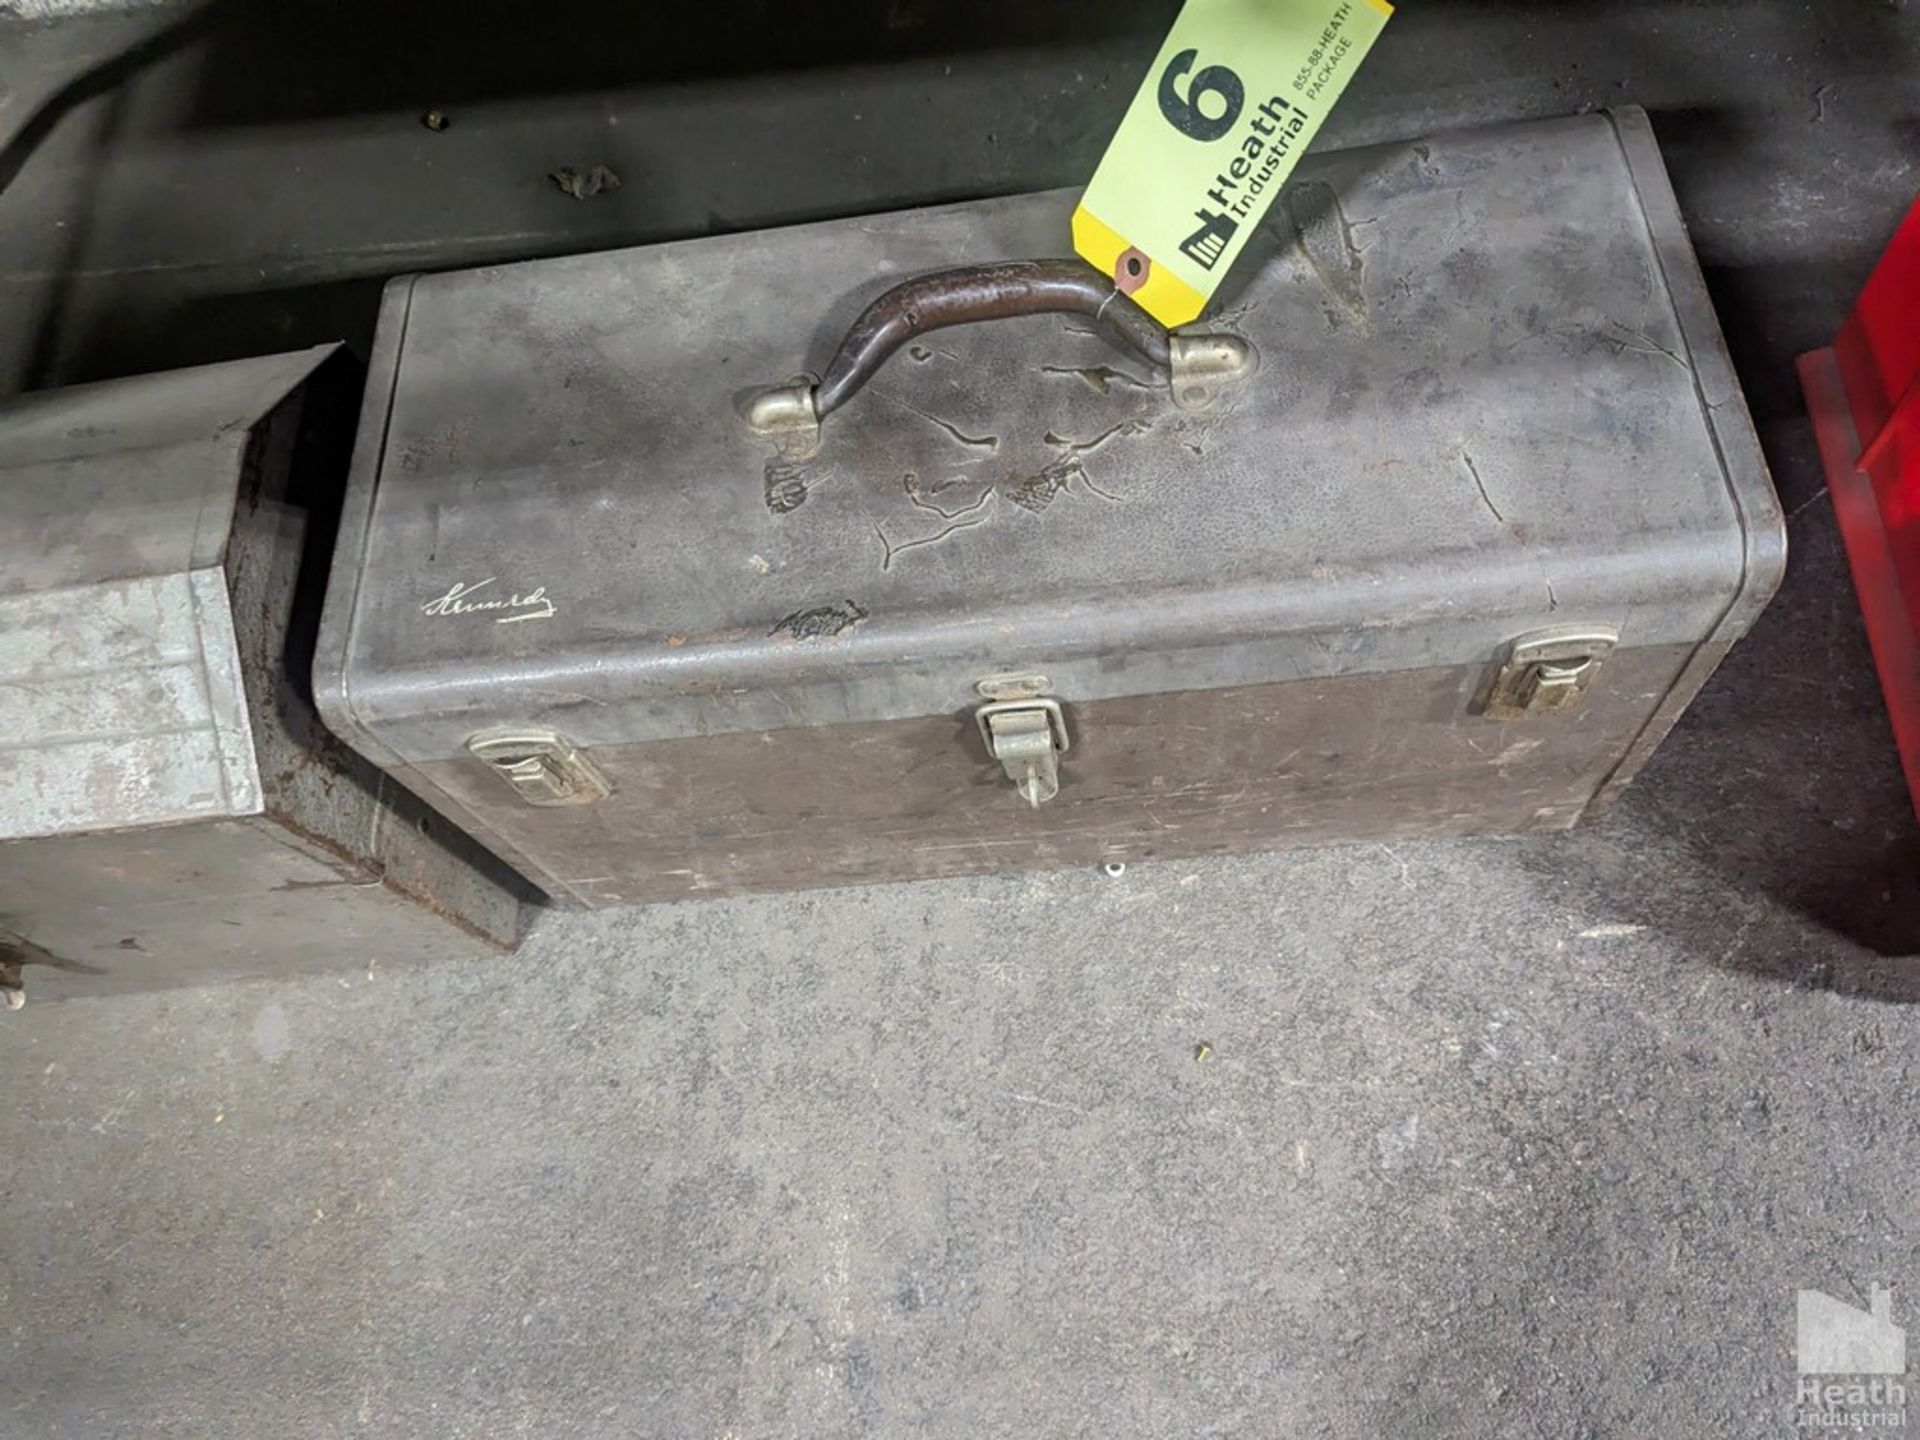 (2) ASSORTED TOOL BOXES KENNEDY 20" AND CRAFTSMAN 17"